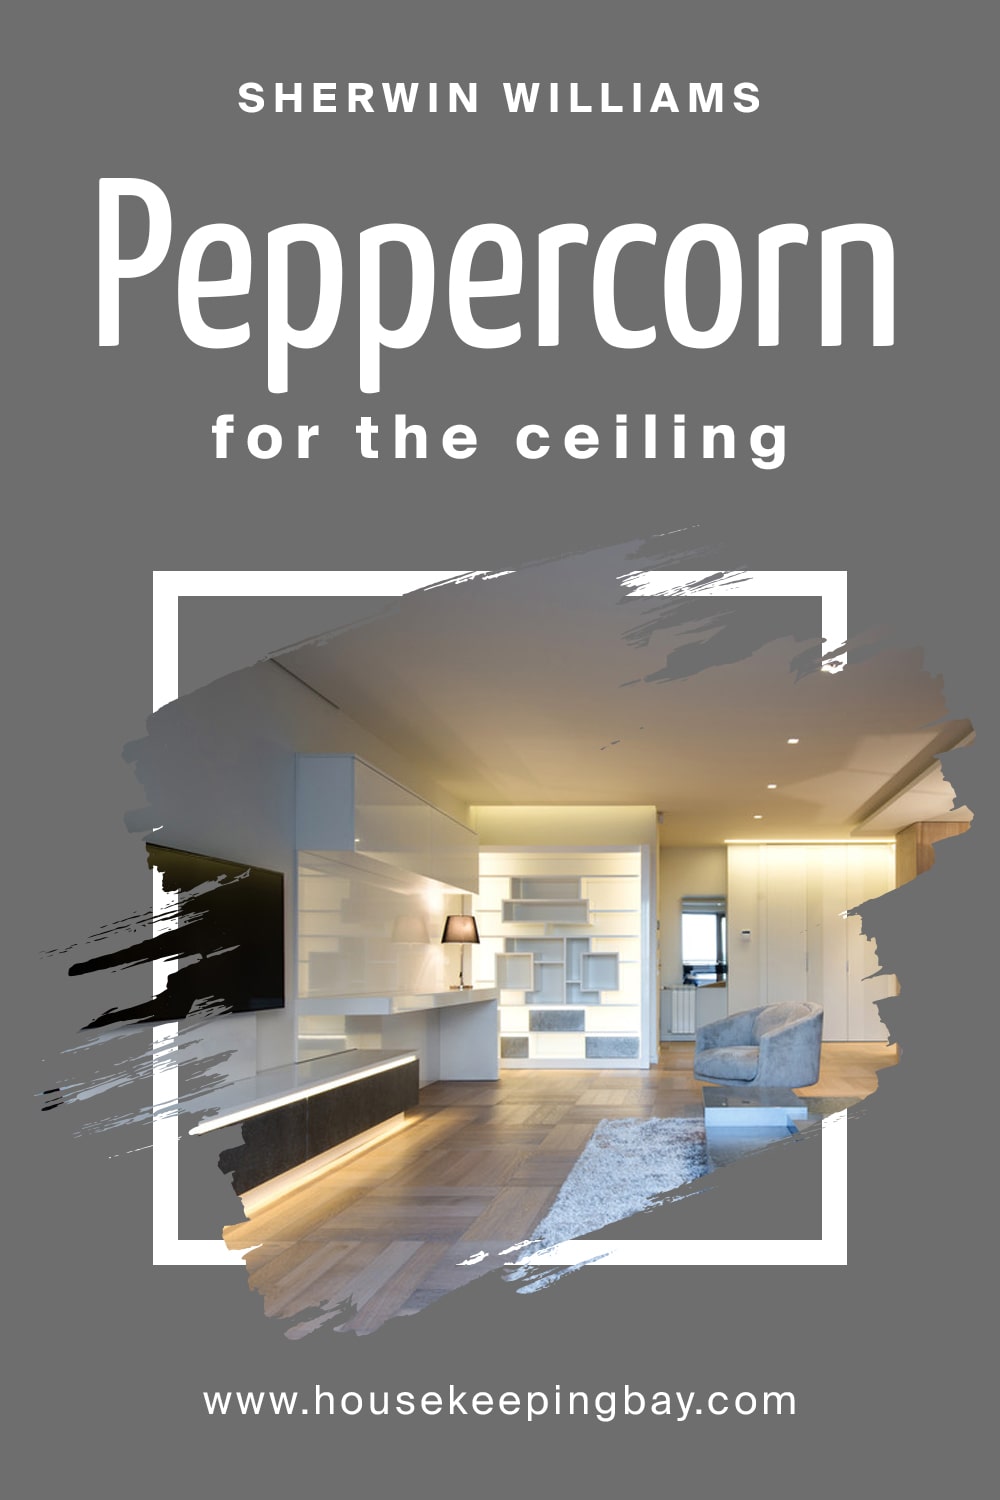 Peppercorn for the ceiling